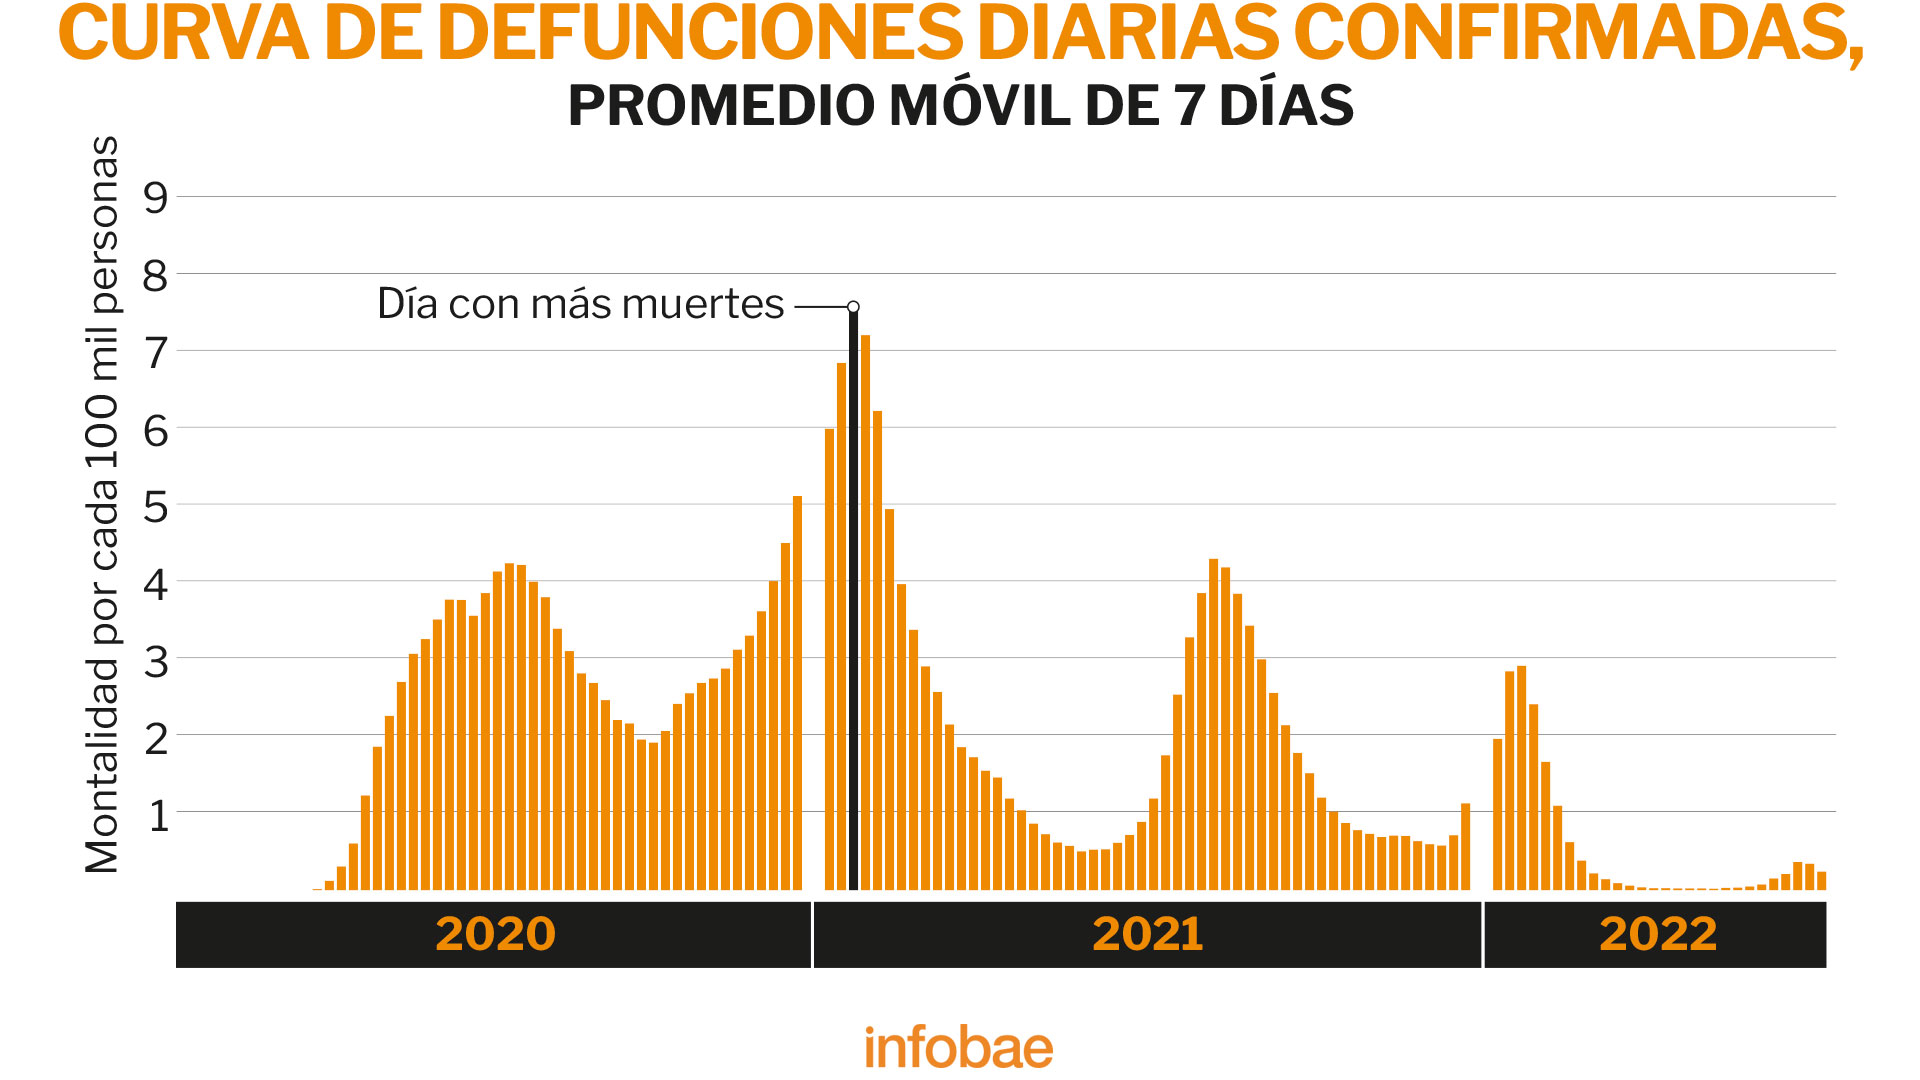 Fifth wave of COVID-19 in Mexico, August 2022. (Infobae: Jovani)